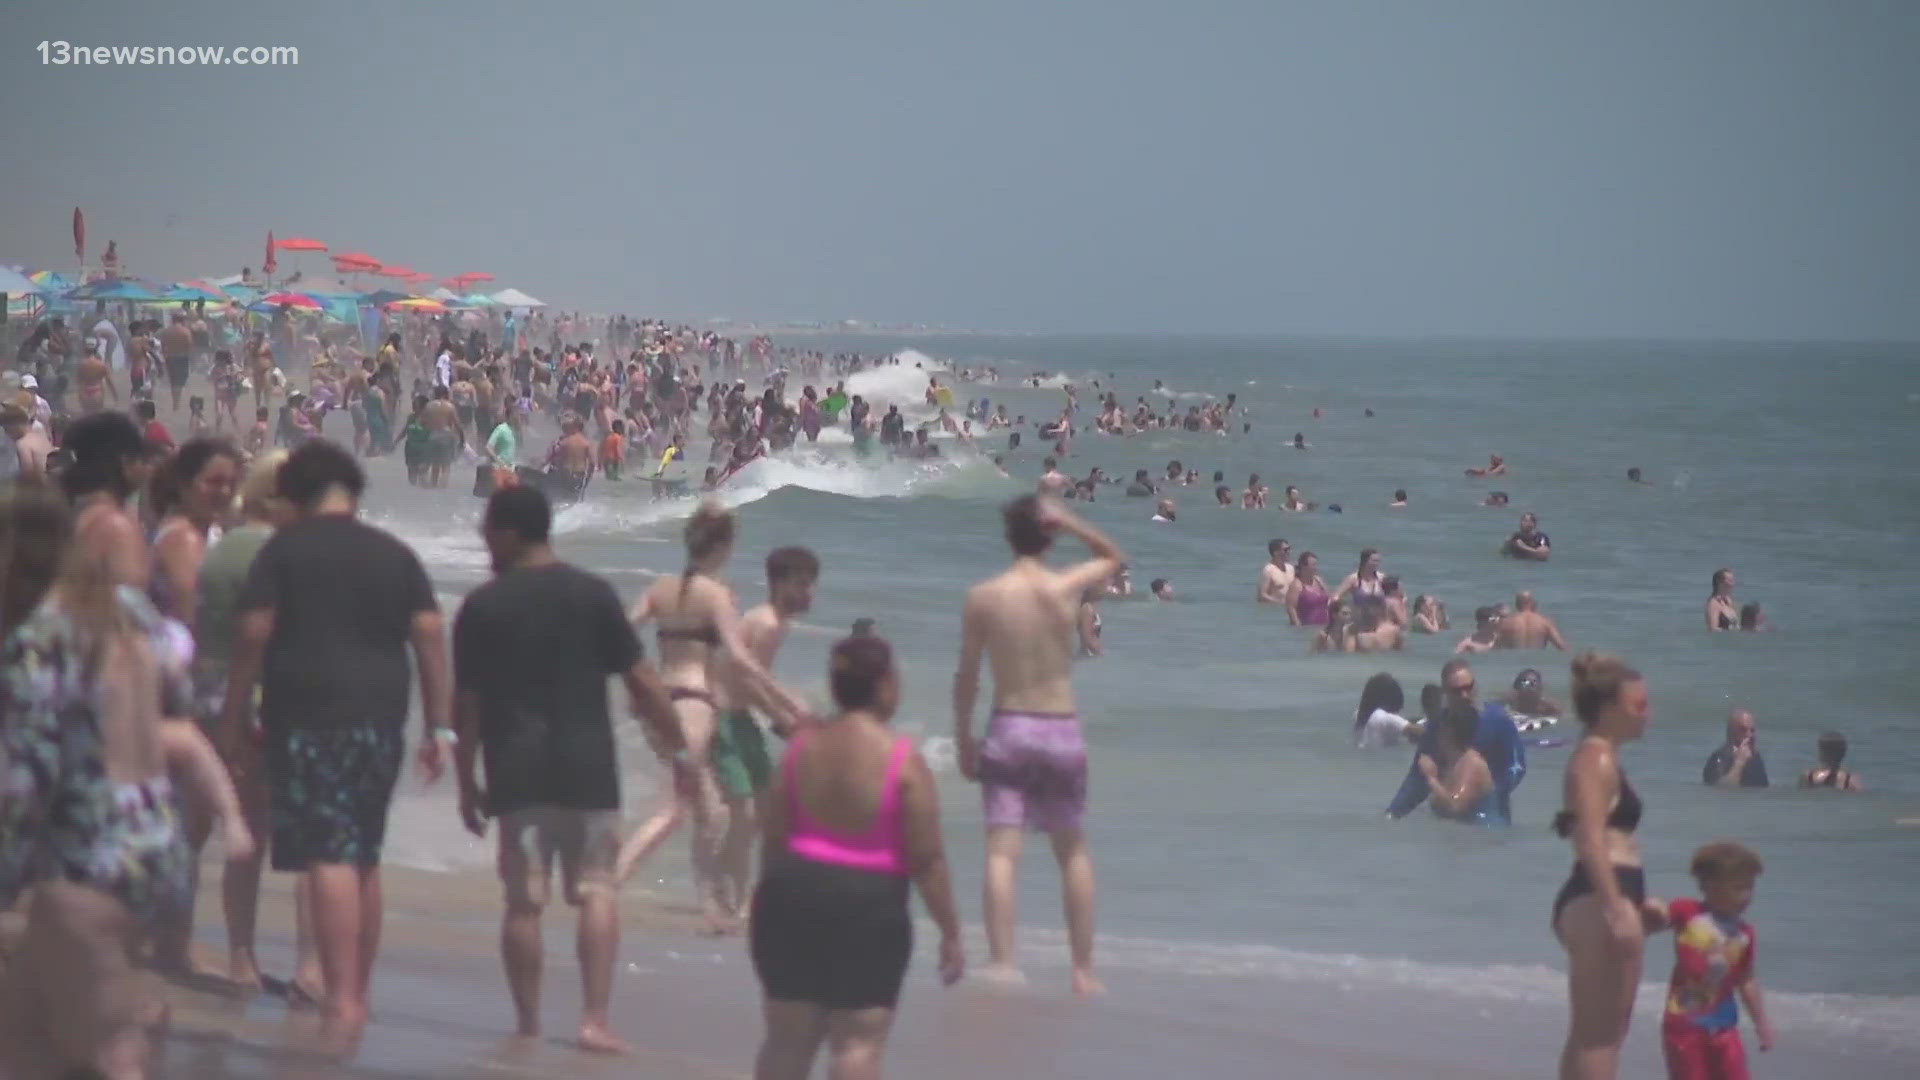 With temperatures rising, plenty of people are looking to the Virginia Beach Oceanfront to cool off.